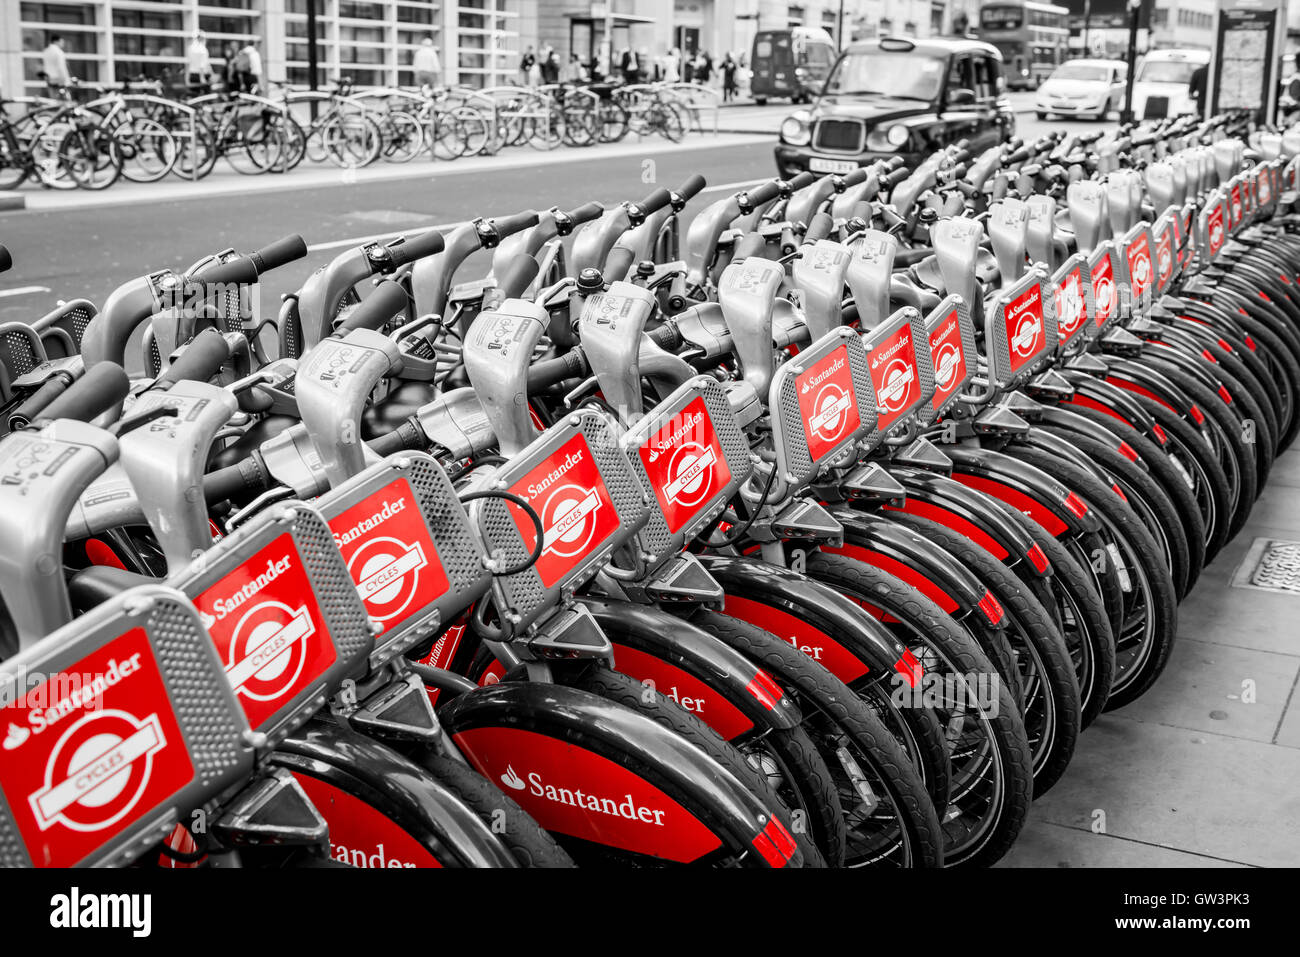 London, United Kingdom - July 22, 2016: Stack of Santander rental bikes (prevously known as Boris bikes) for hire in London Stock Photo